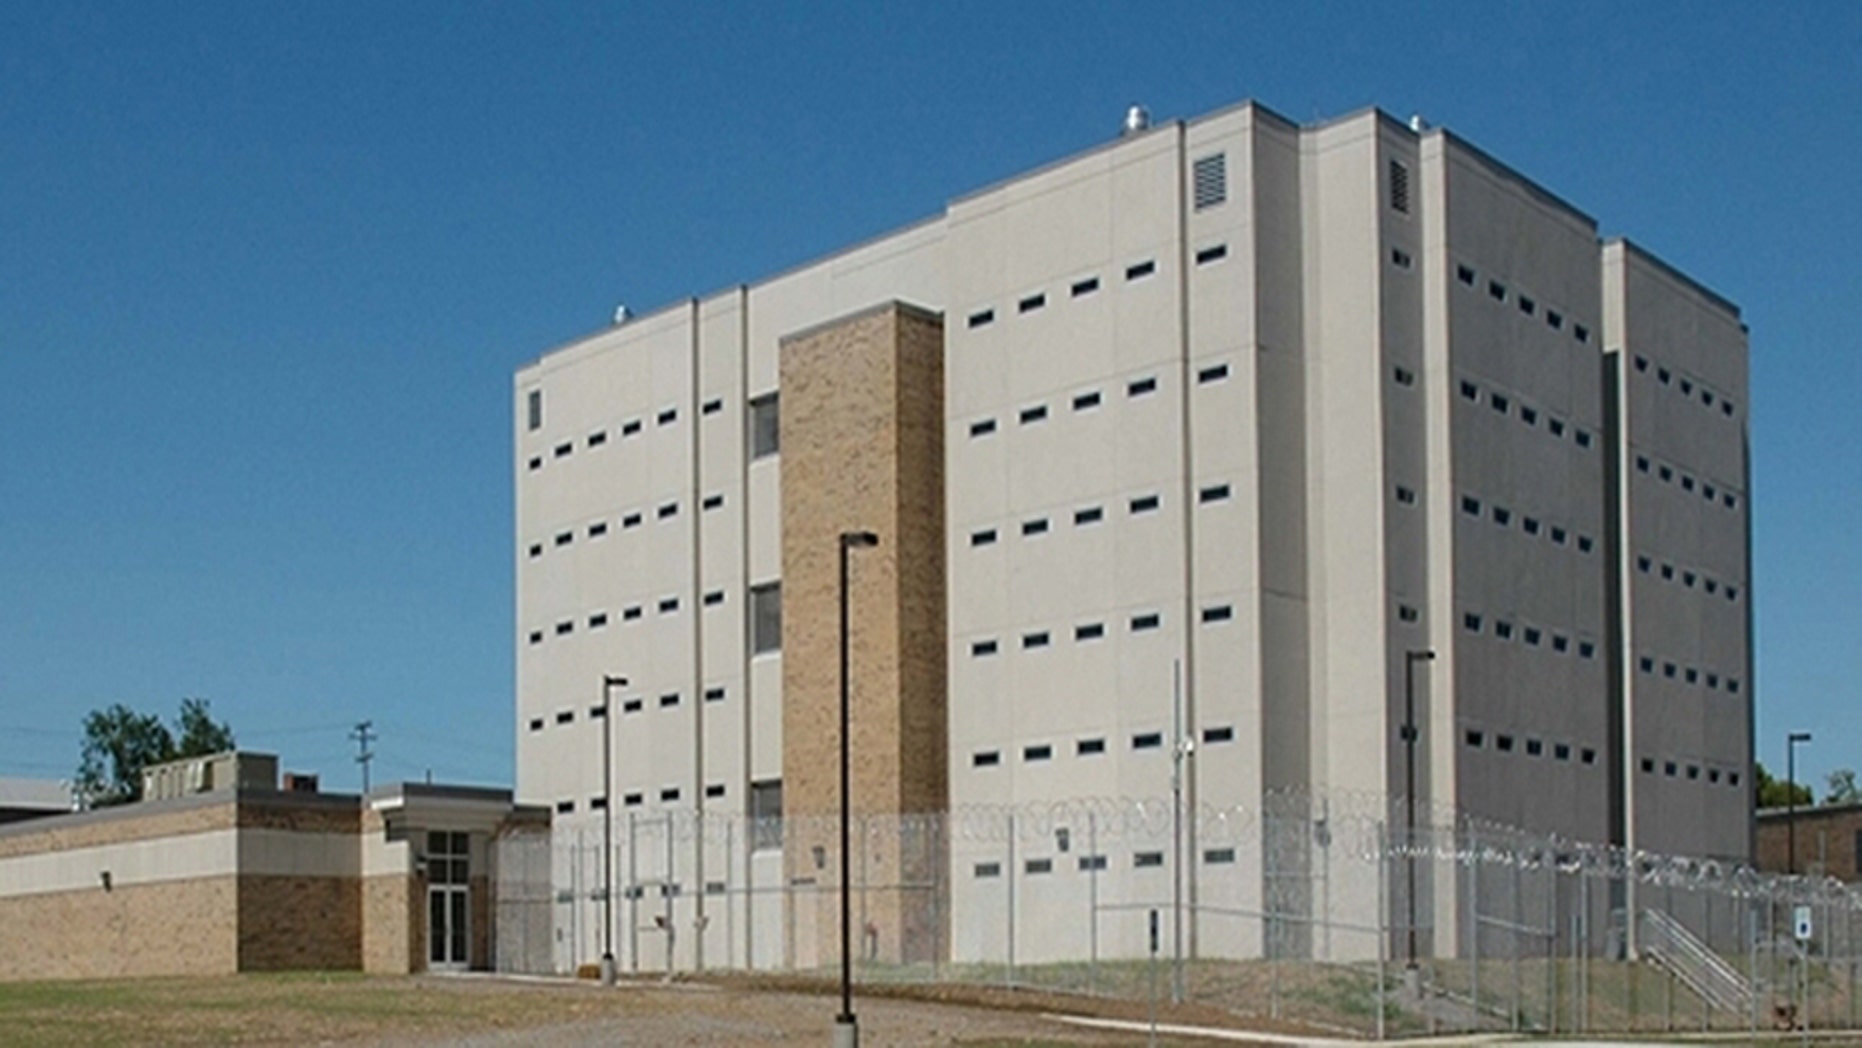 Tennessee jail inmates reportedly hospitalized after suspected